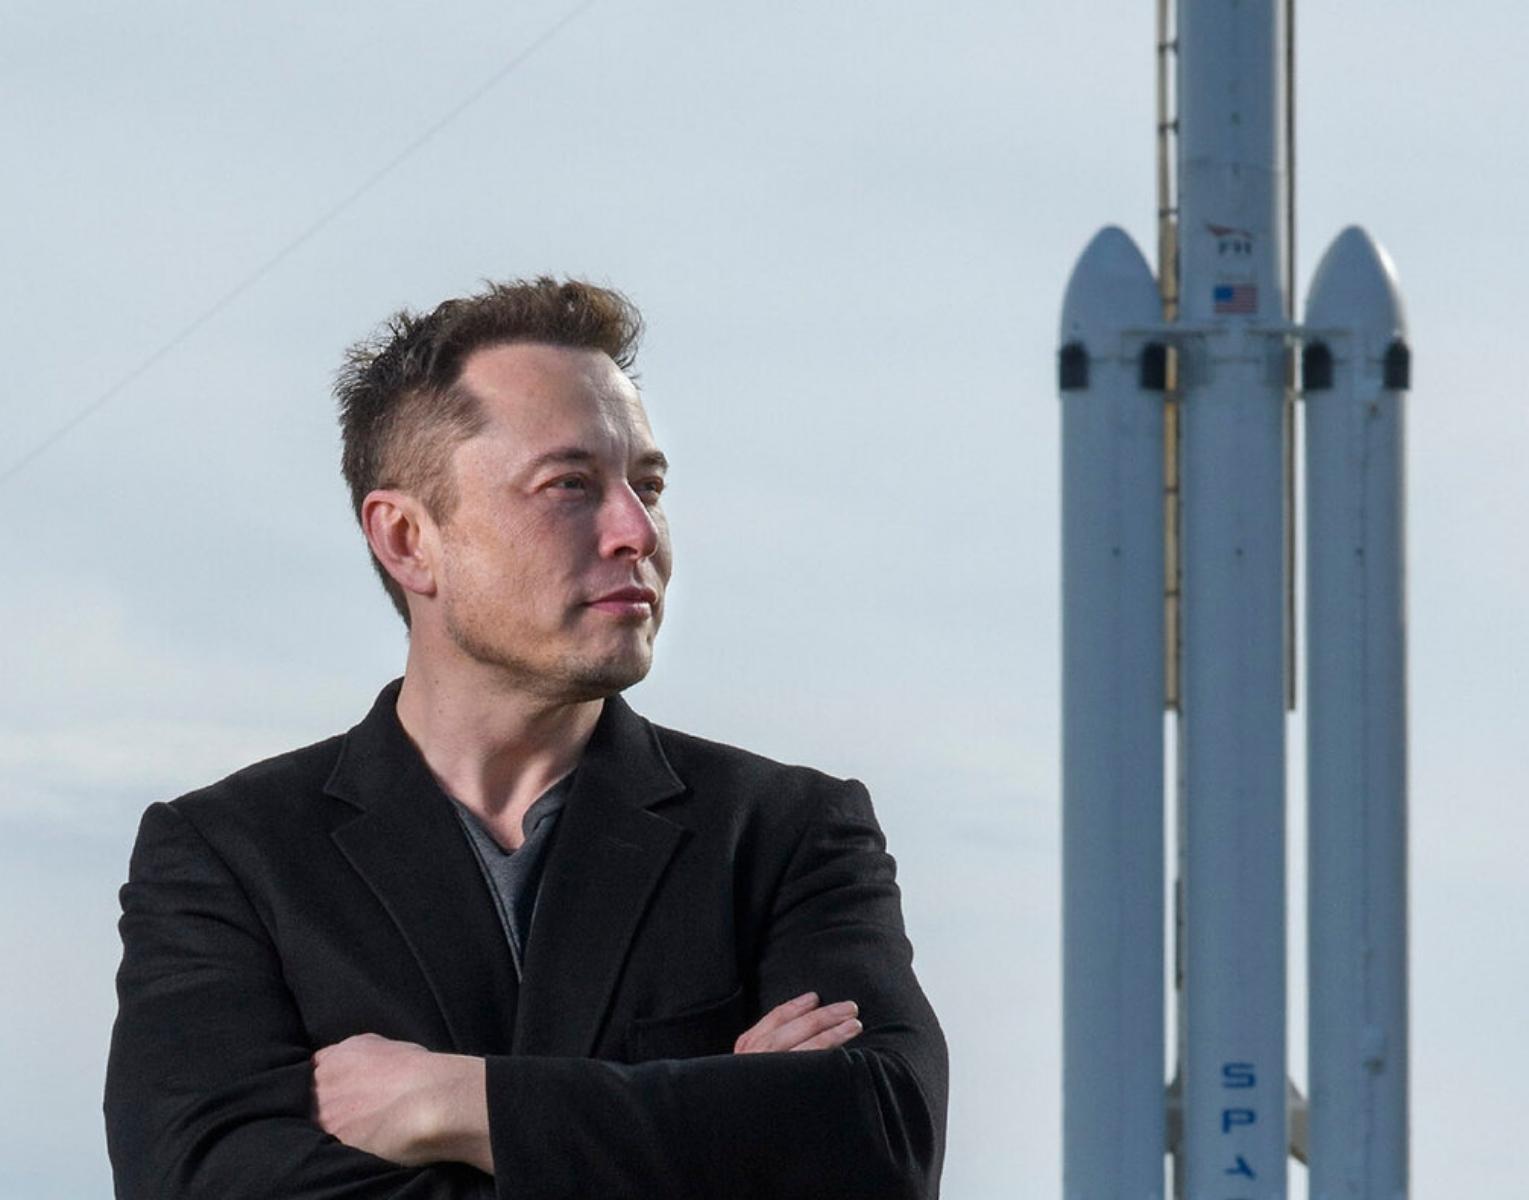 ELON MUSK (CEO OF TESLA AND SPACE-X)